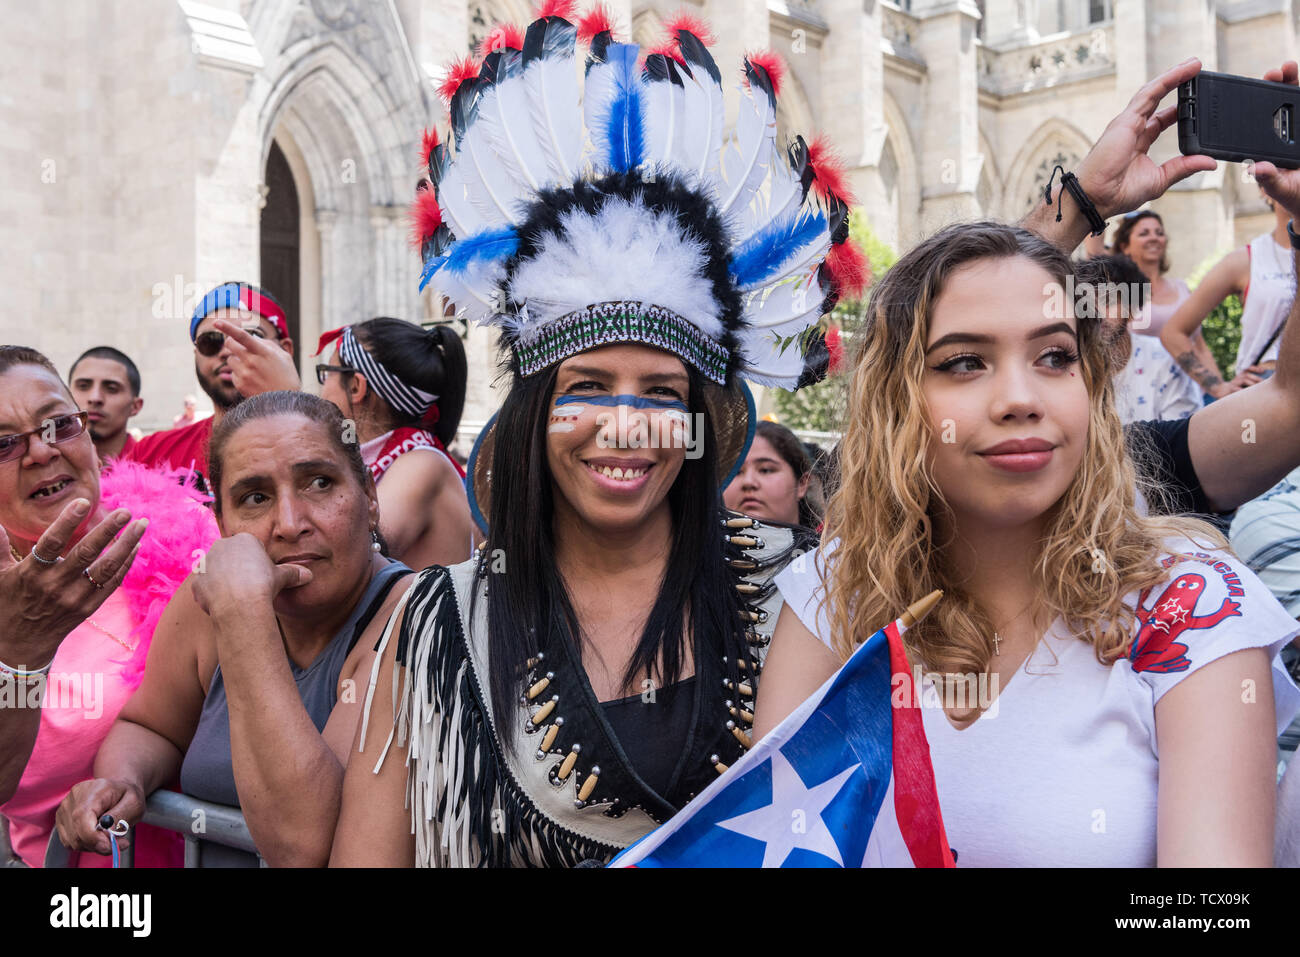 New York, USA. 09th June, 2019. On June 9, 2019, millions of people lined the streets along 5th Avenue in Midtown Manhattan celebrating their Puerto Rican heritage. In its 62nd year, the National Puerto Rican Day Parade is the largest parade of Puerto Rican culture. This year's theme was "Un Pueblo, Muchas Voces" (One Nation, Many Voices) celebrating the diversity of Puerto Rico. Credit: Gabriele Holtermann-Gorden/Pacific Press/Alamy Live News Stock Photo